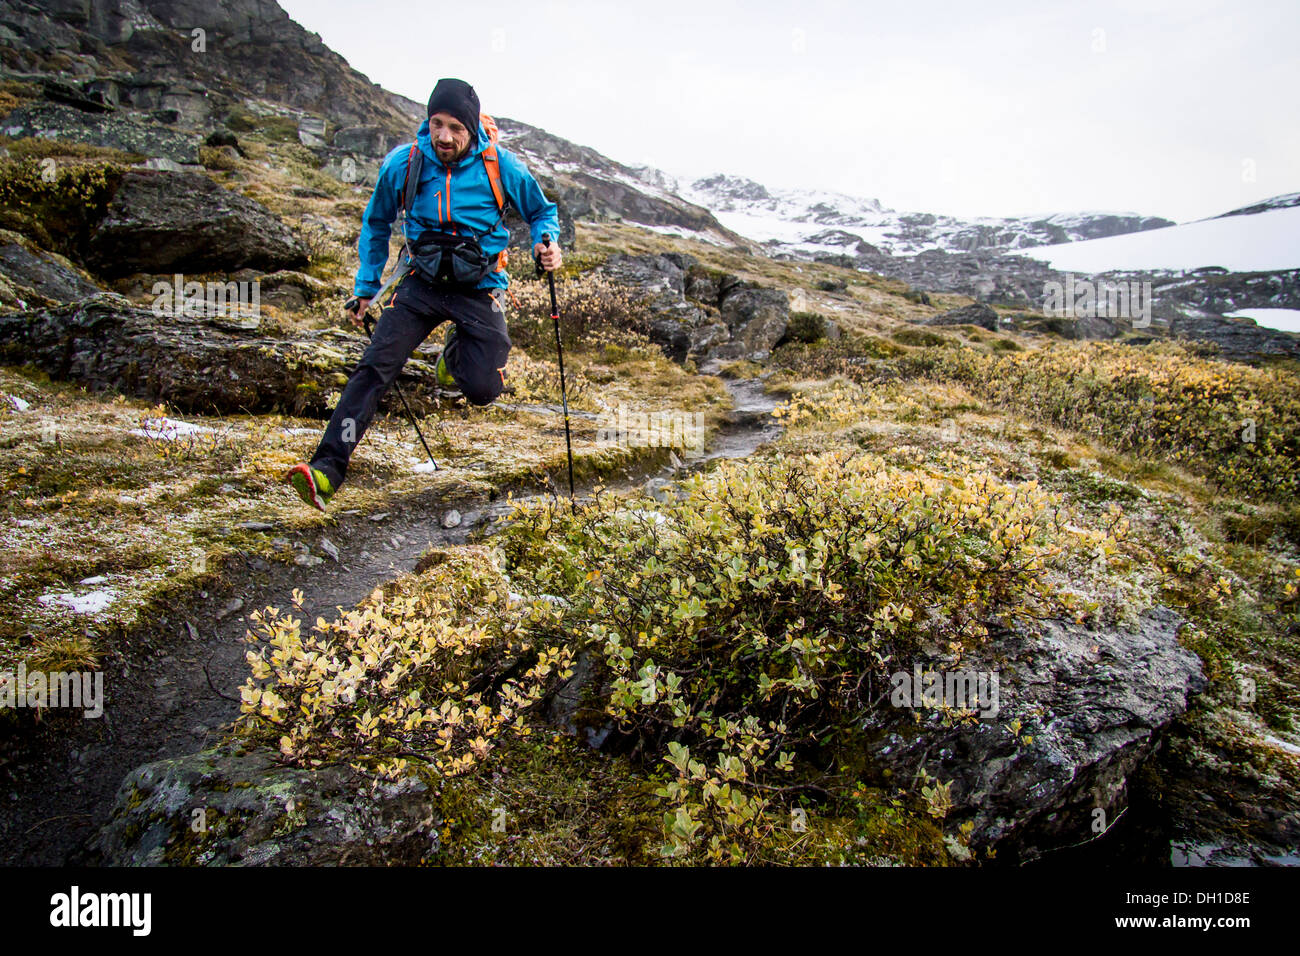 Hiker jumping along mountain trail, Norway, Europe Stock Photo